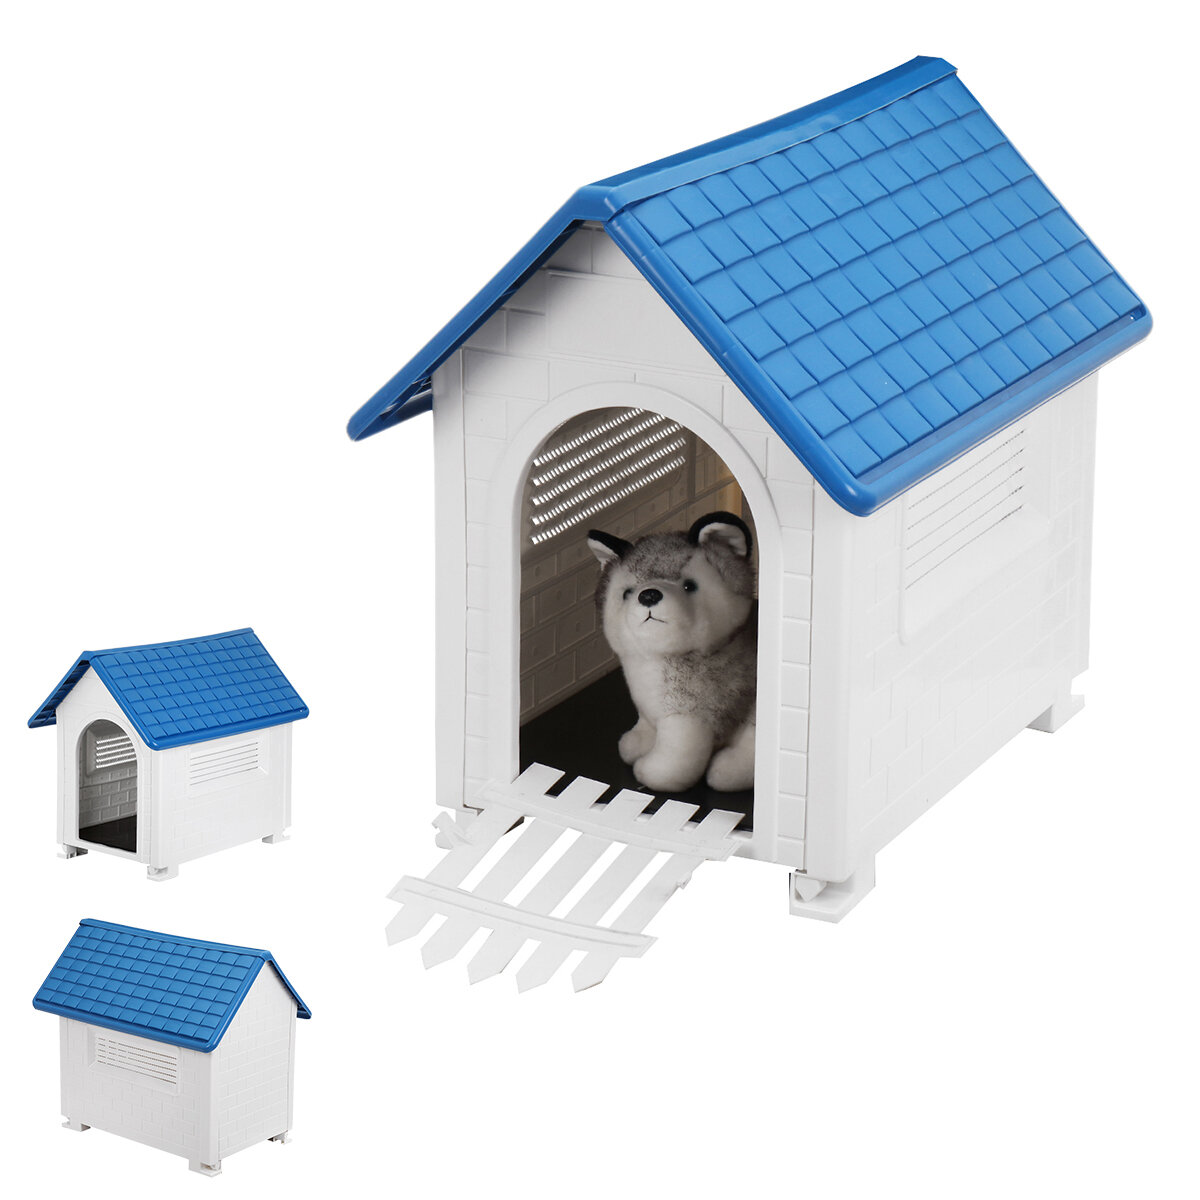 Image of Foldable Plastic Pets Dogs Houses Cages Small Outdoors Waterproof Warm Removable Washable With Kennels